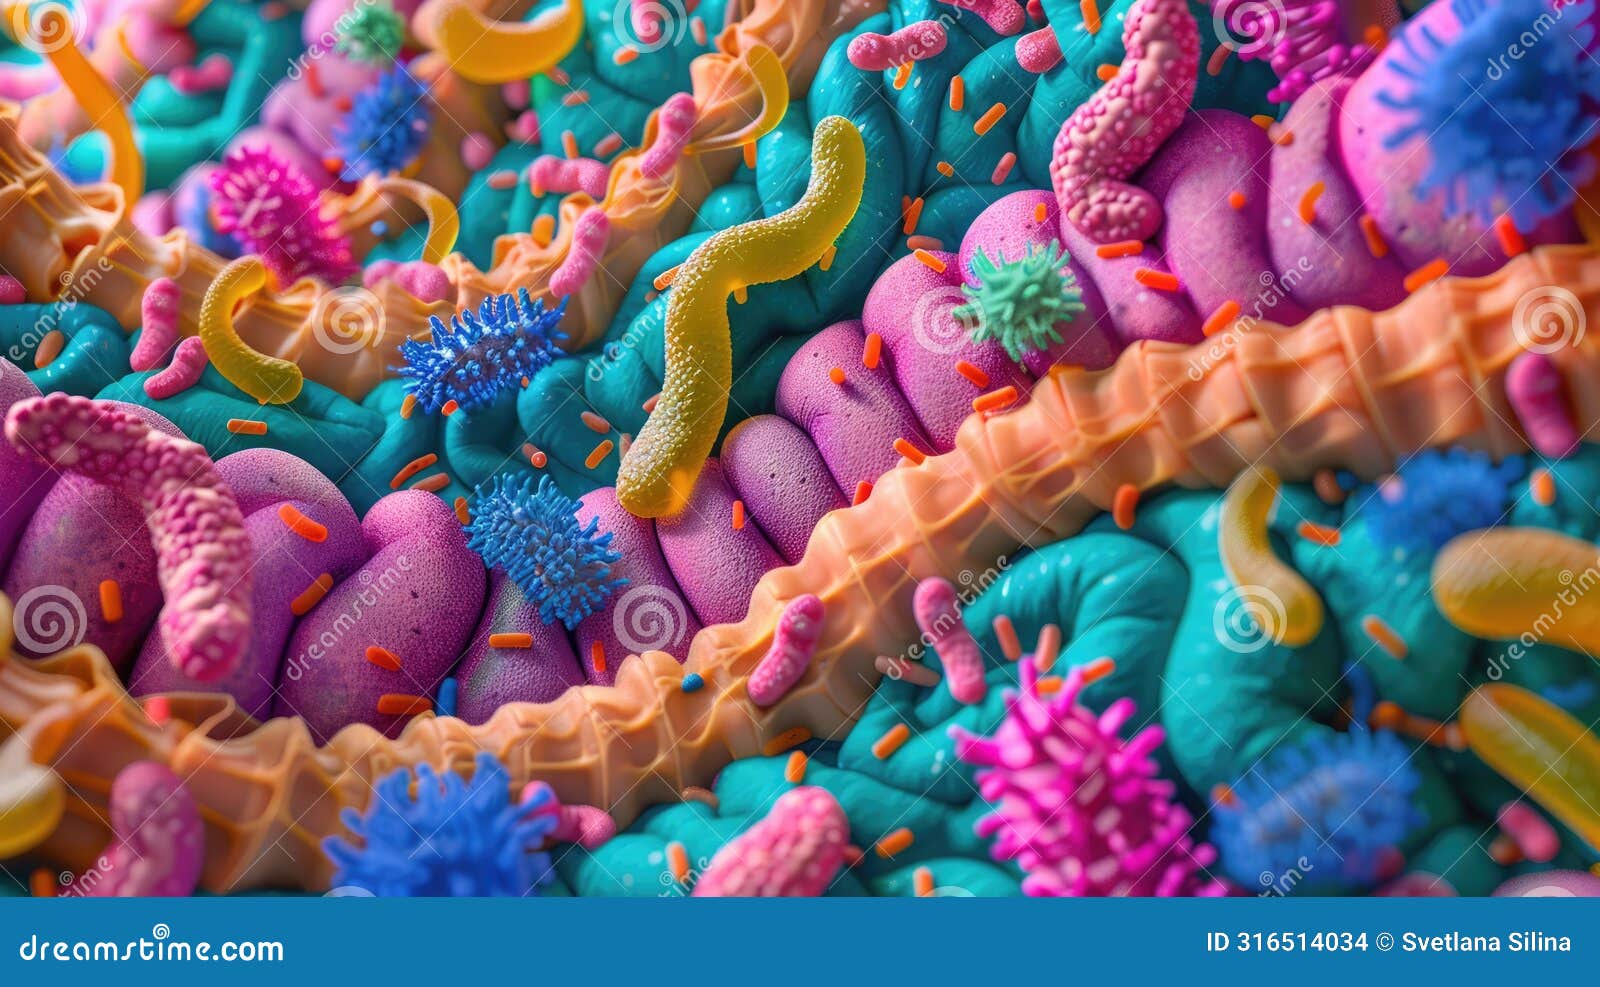 human intestine depiction with beneficial gut flora interacting with the lining